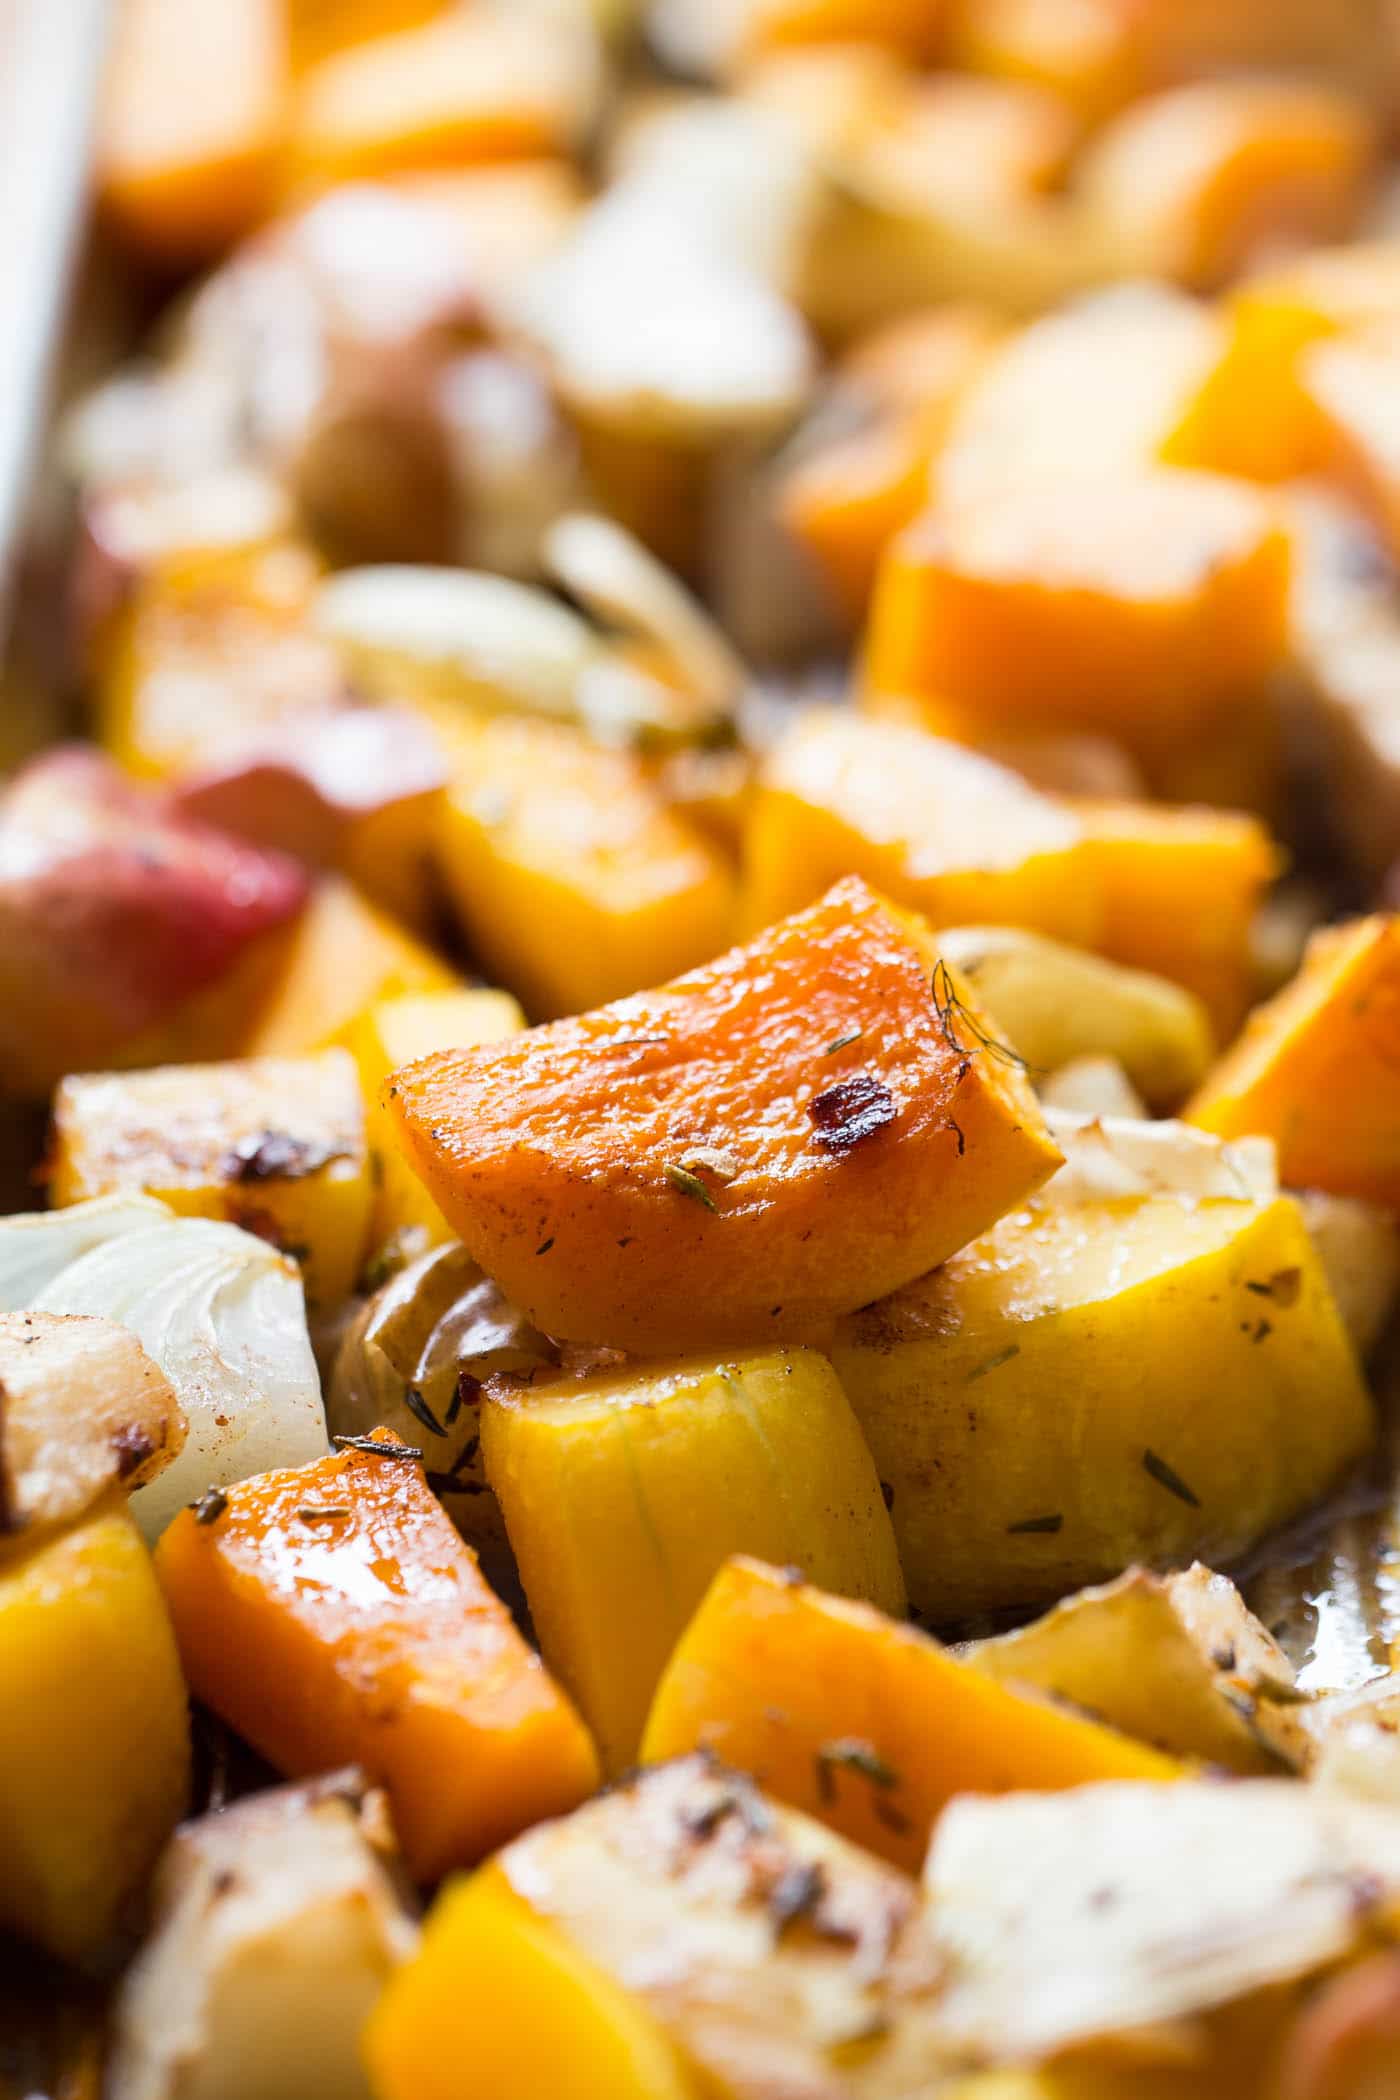 Roasted cubed squash, onions, fennel, and apples, coated in herbs and spices